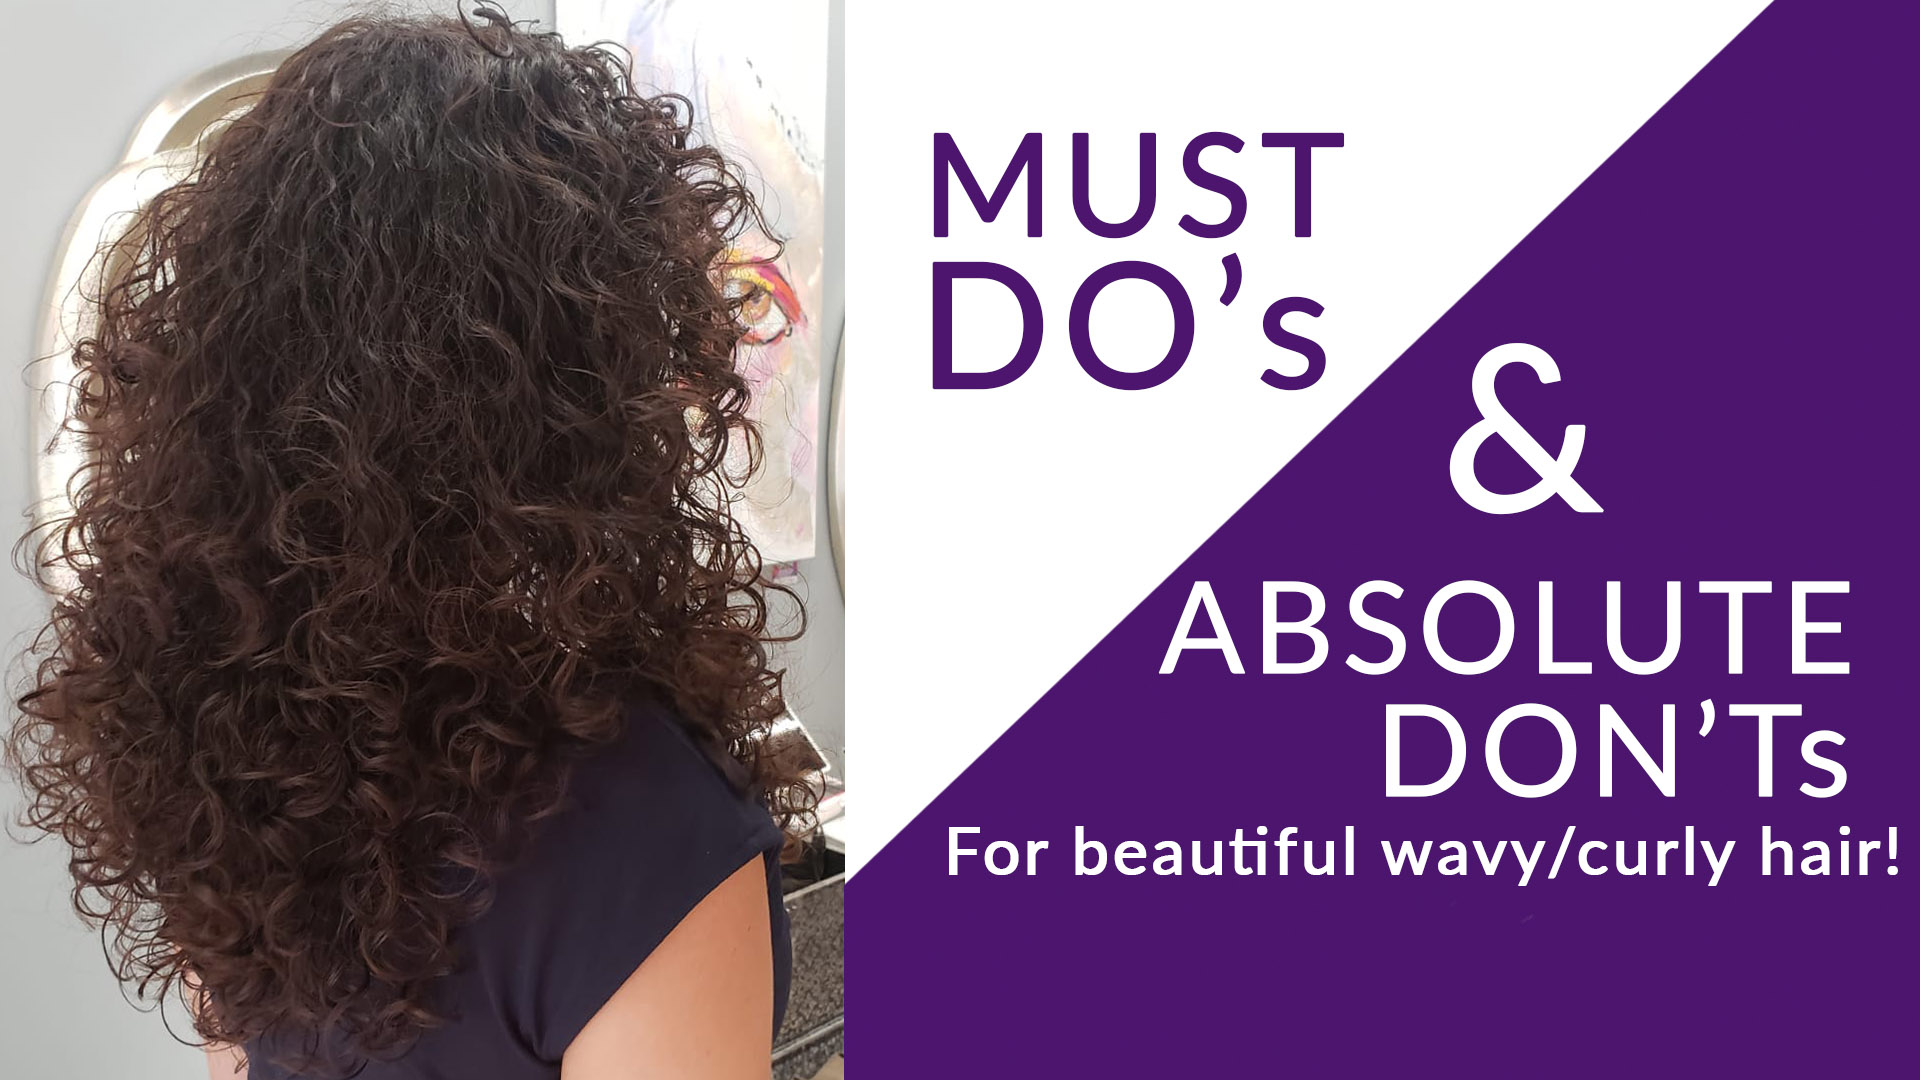 Must Dos for Curly Hair